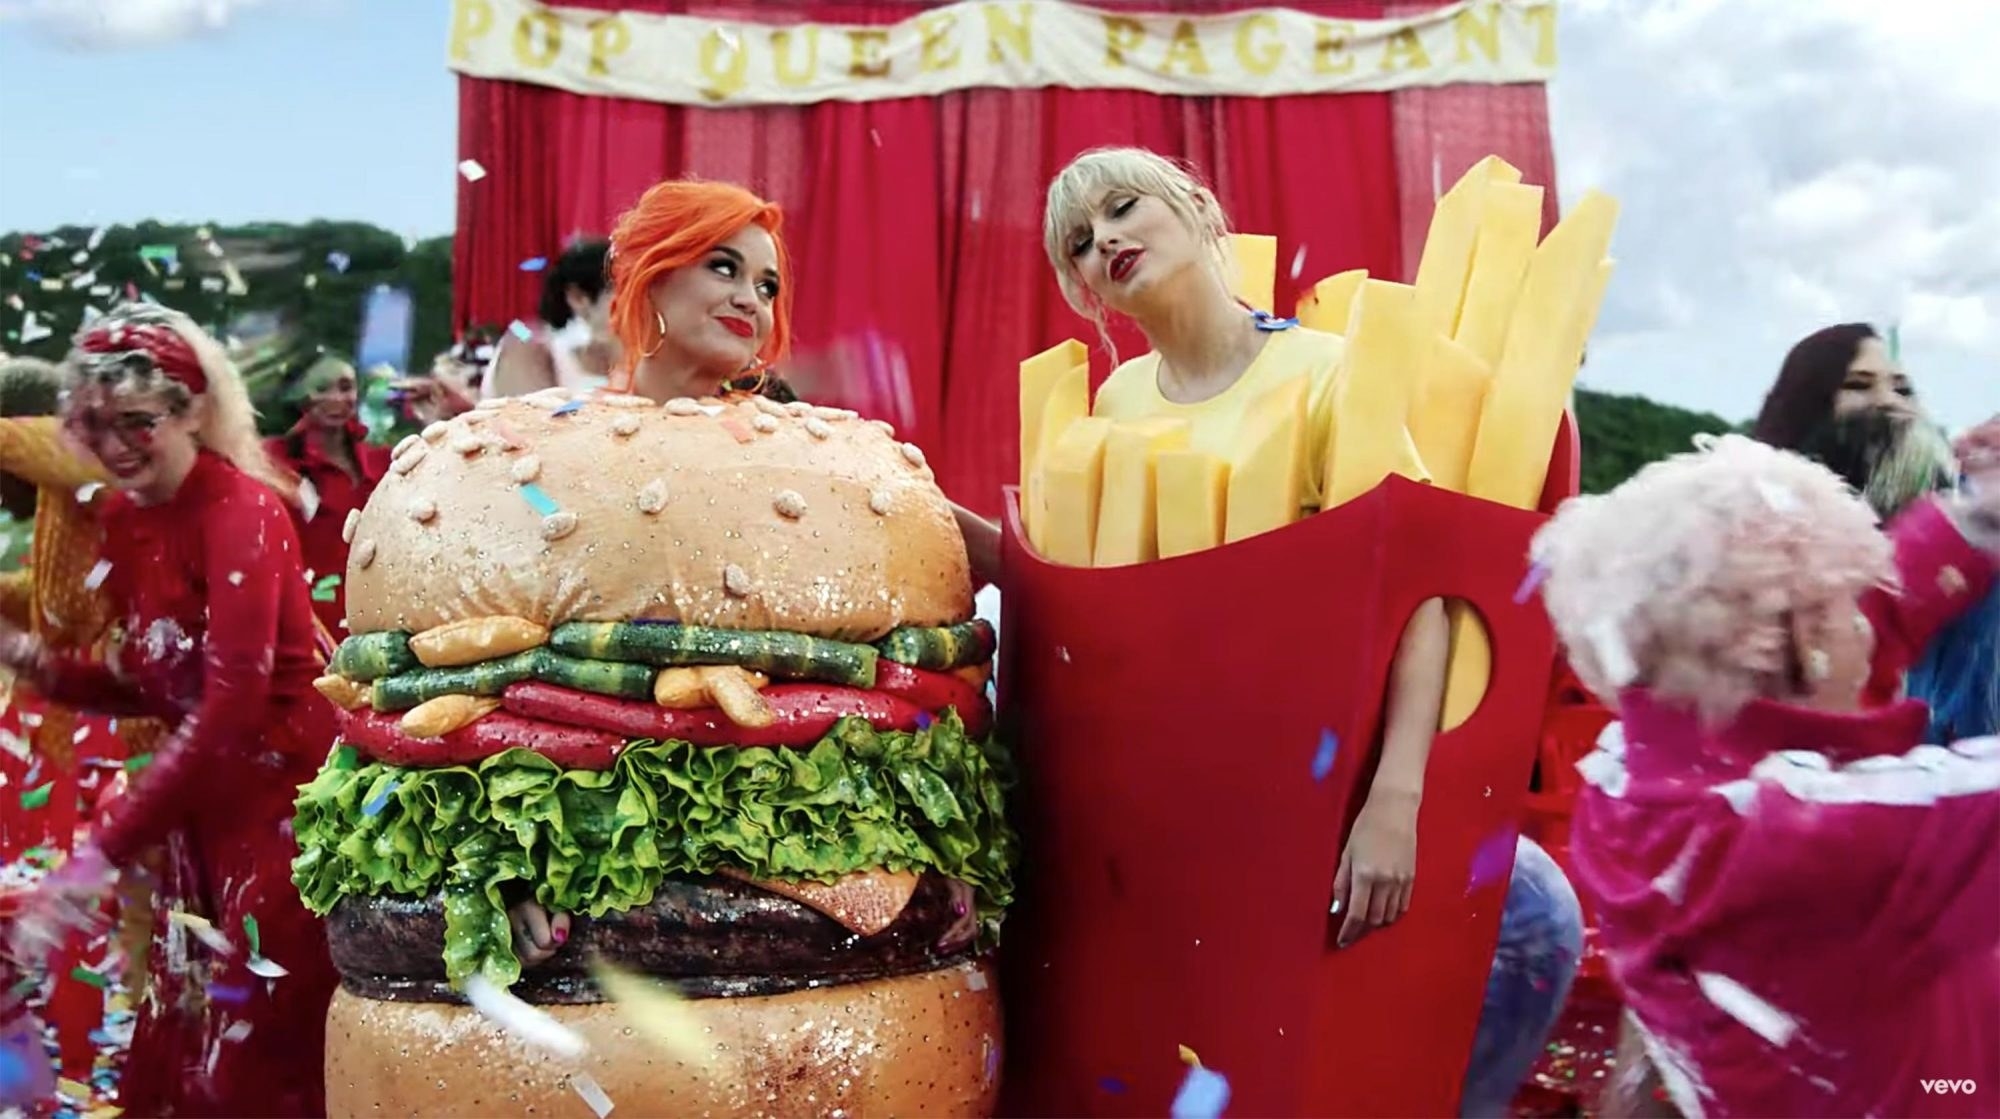 Katy Perry as a burger and Taylor as fries in her &quot;You Need to Calm Down&quot; music video